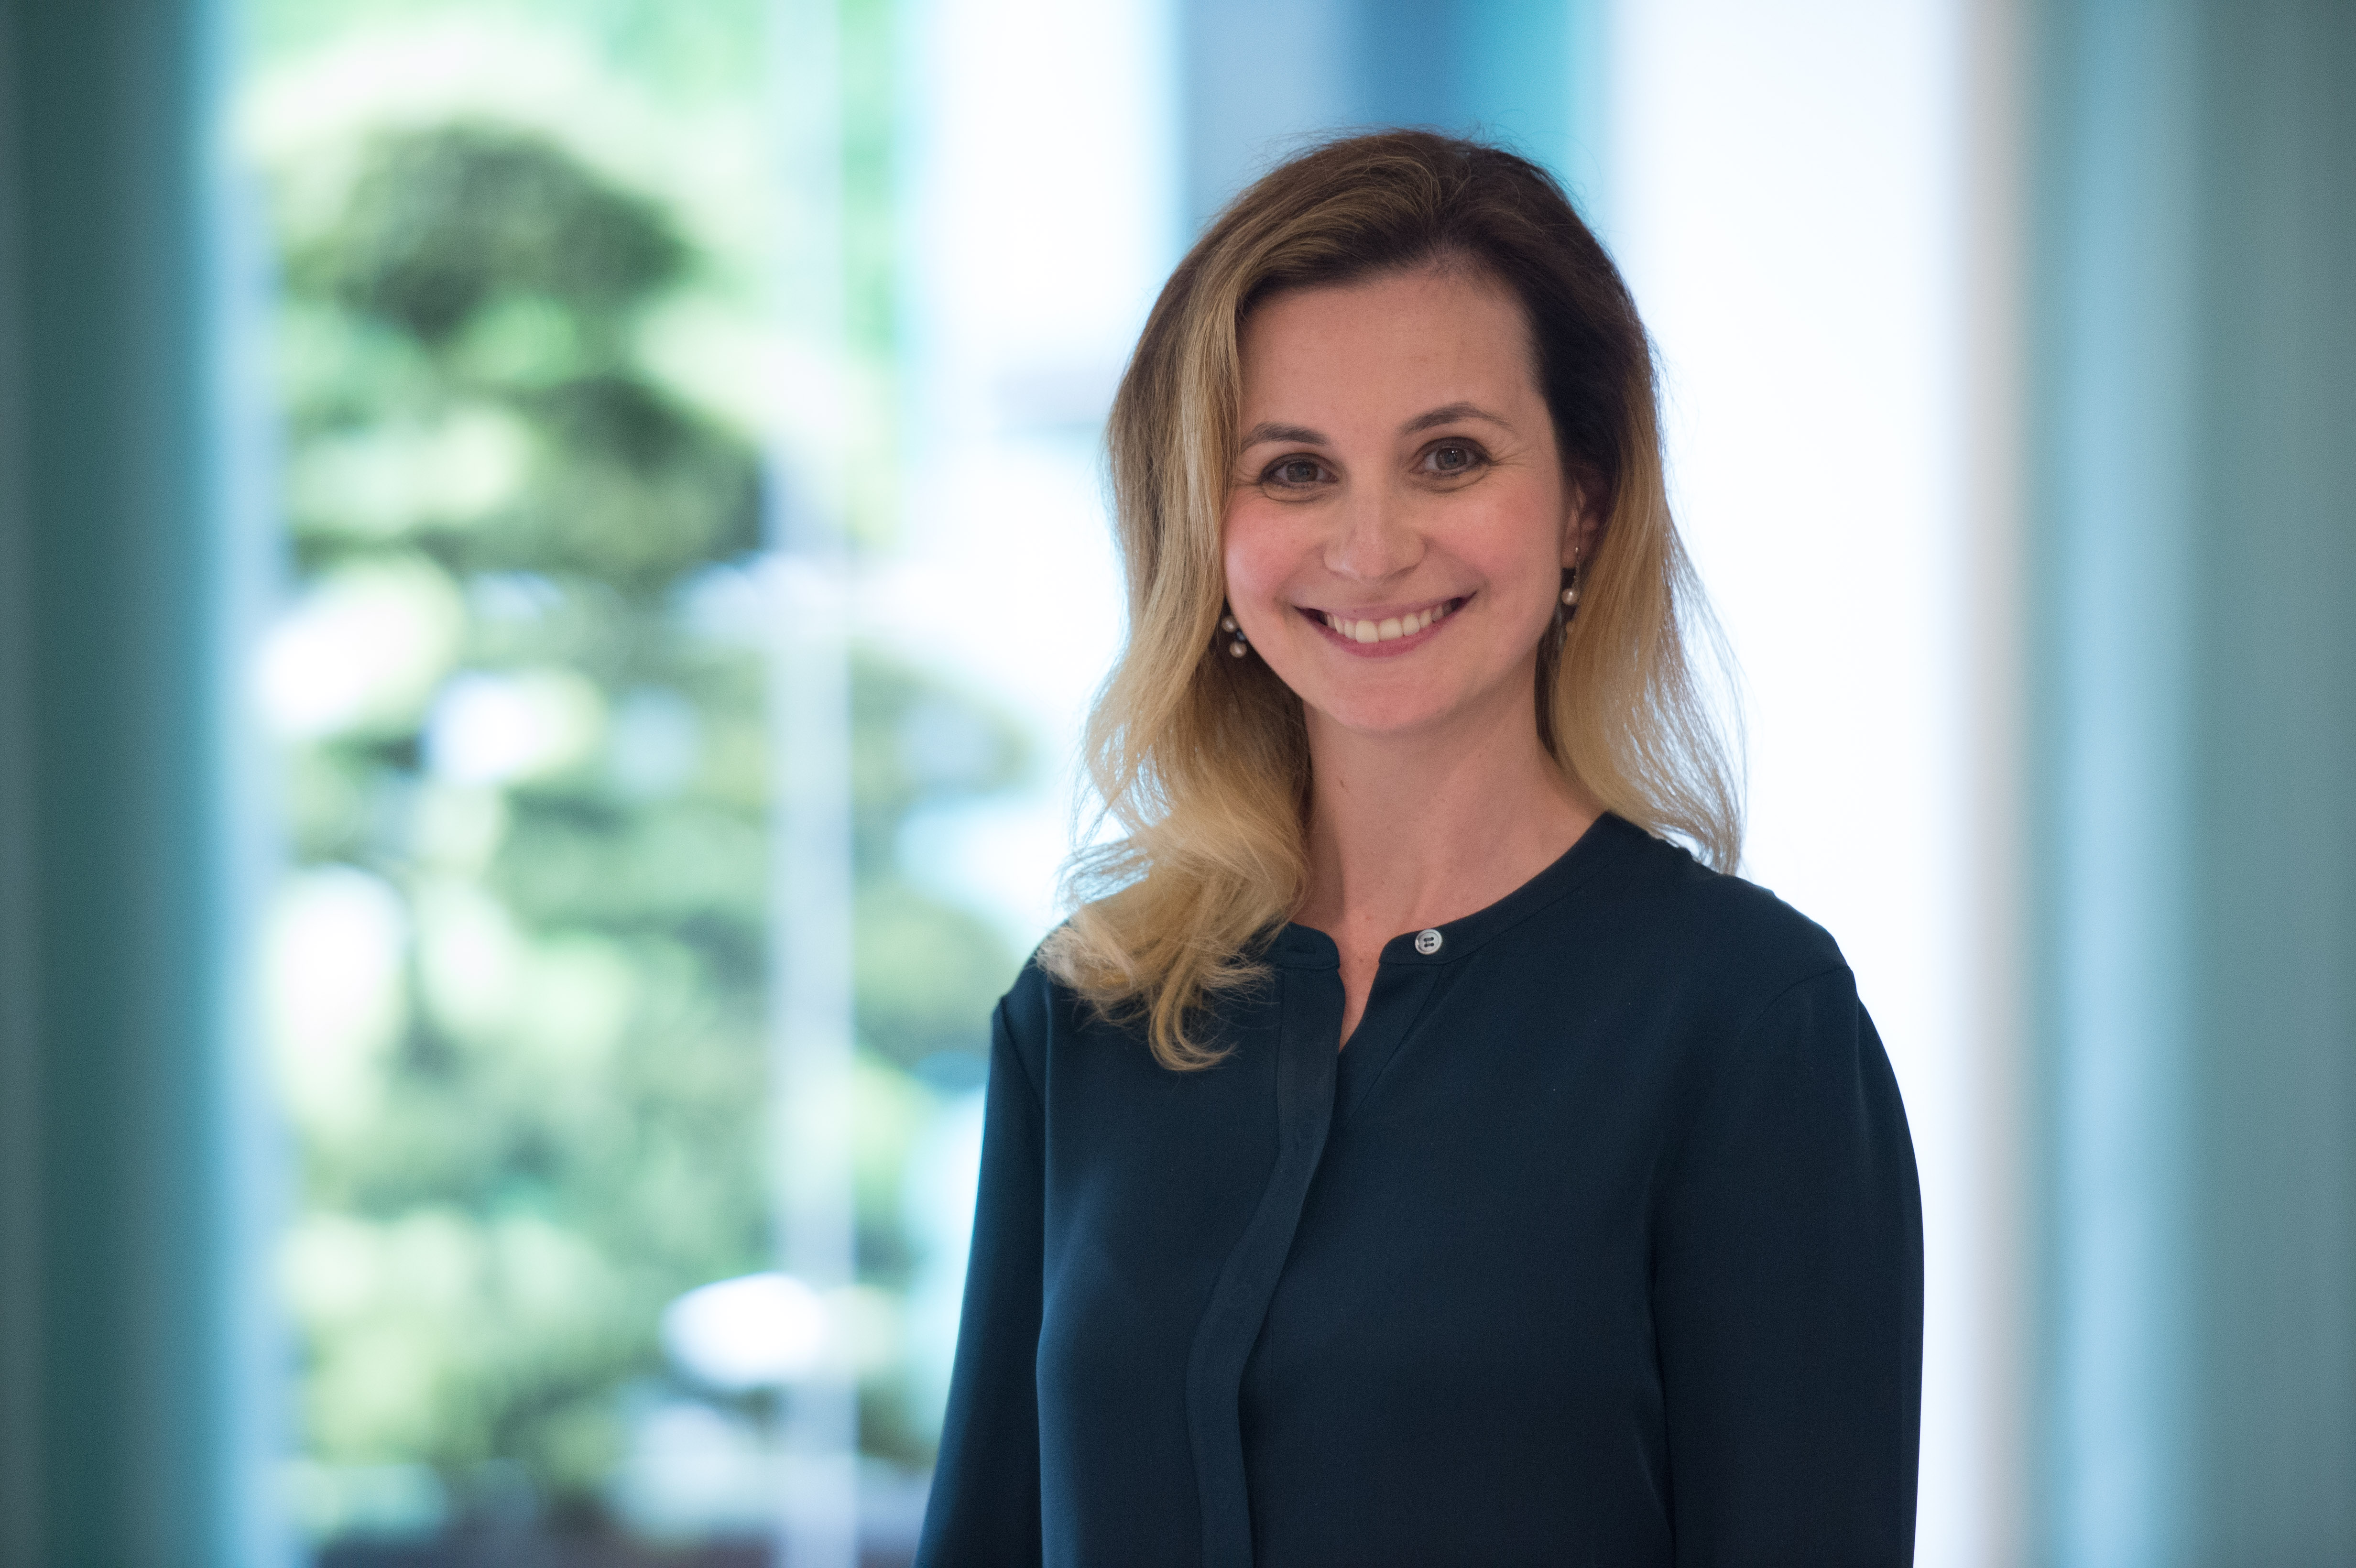 The 2021 Women Leaders In Consulting: Maria Steingoltz